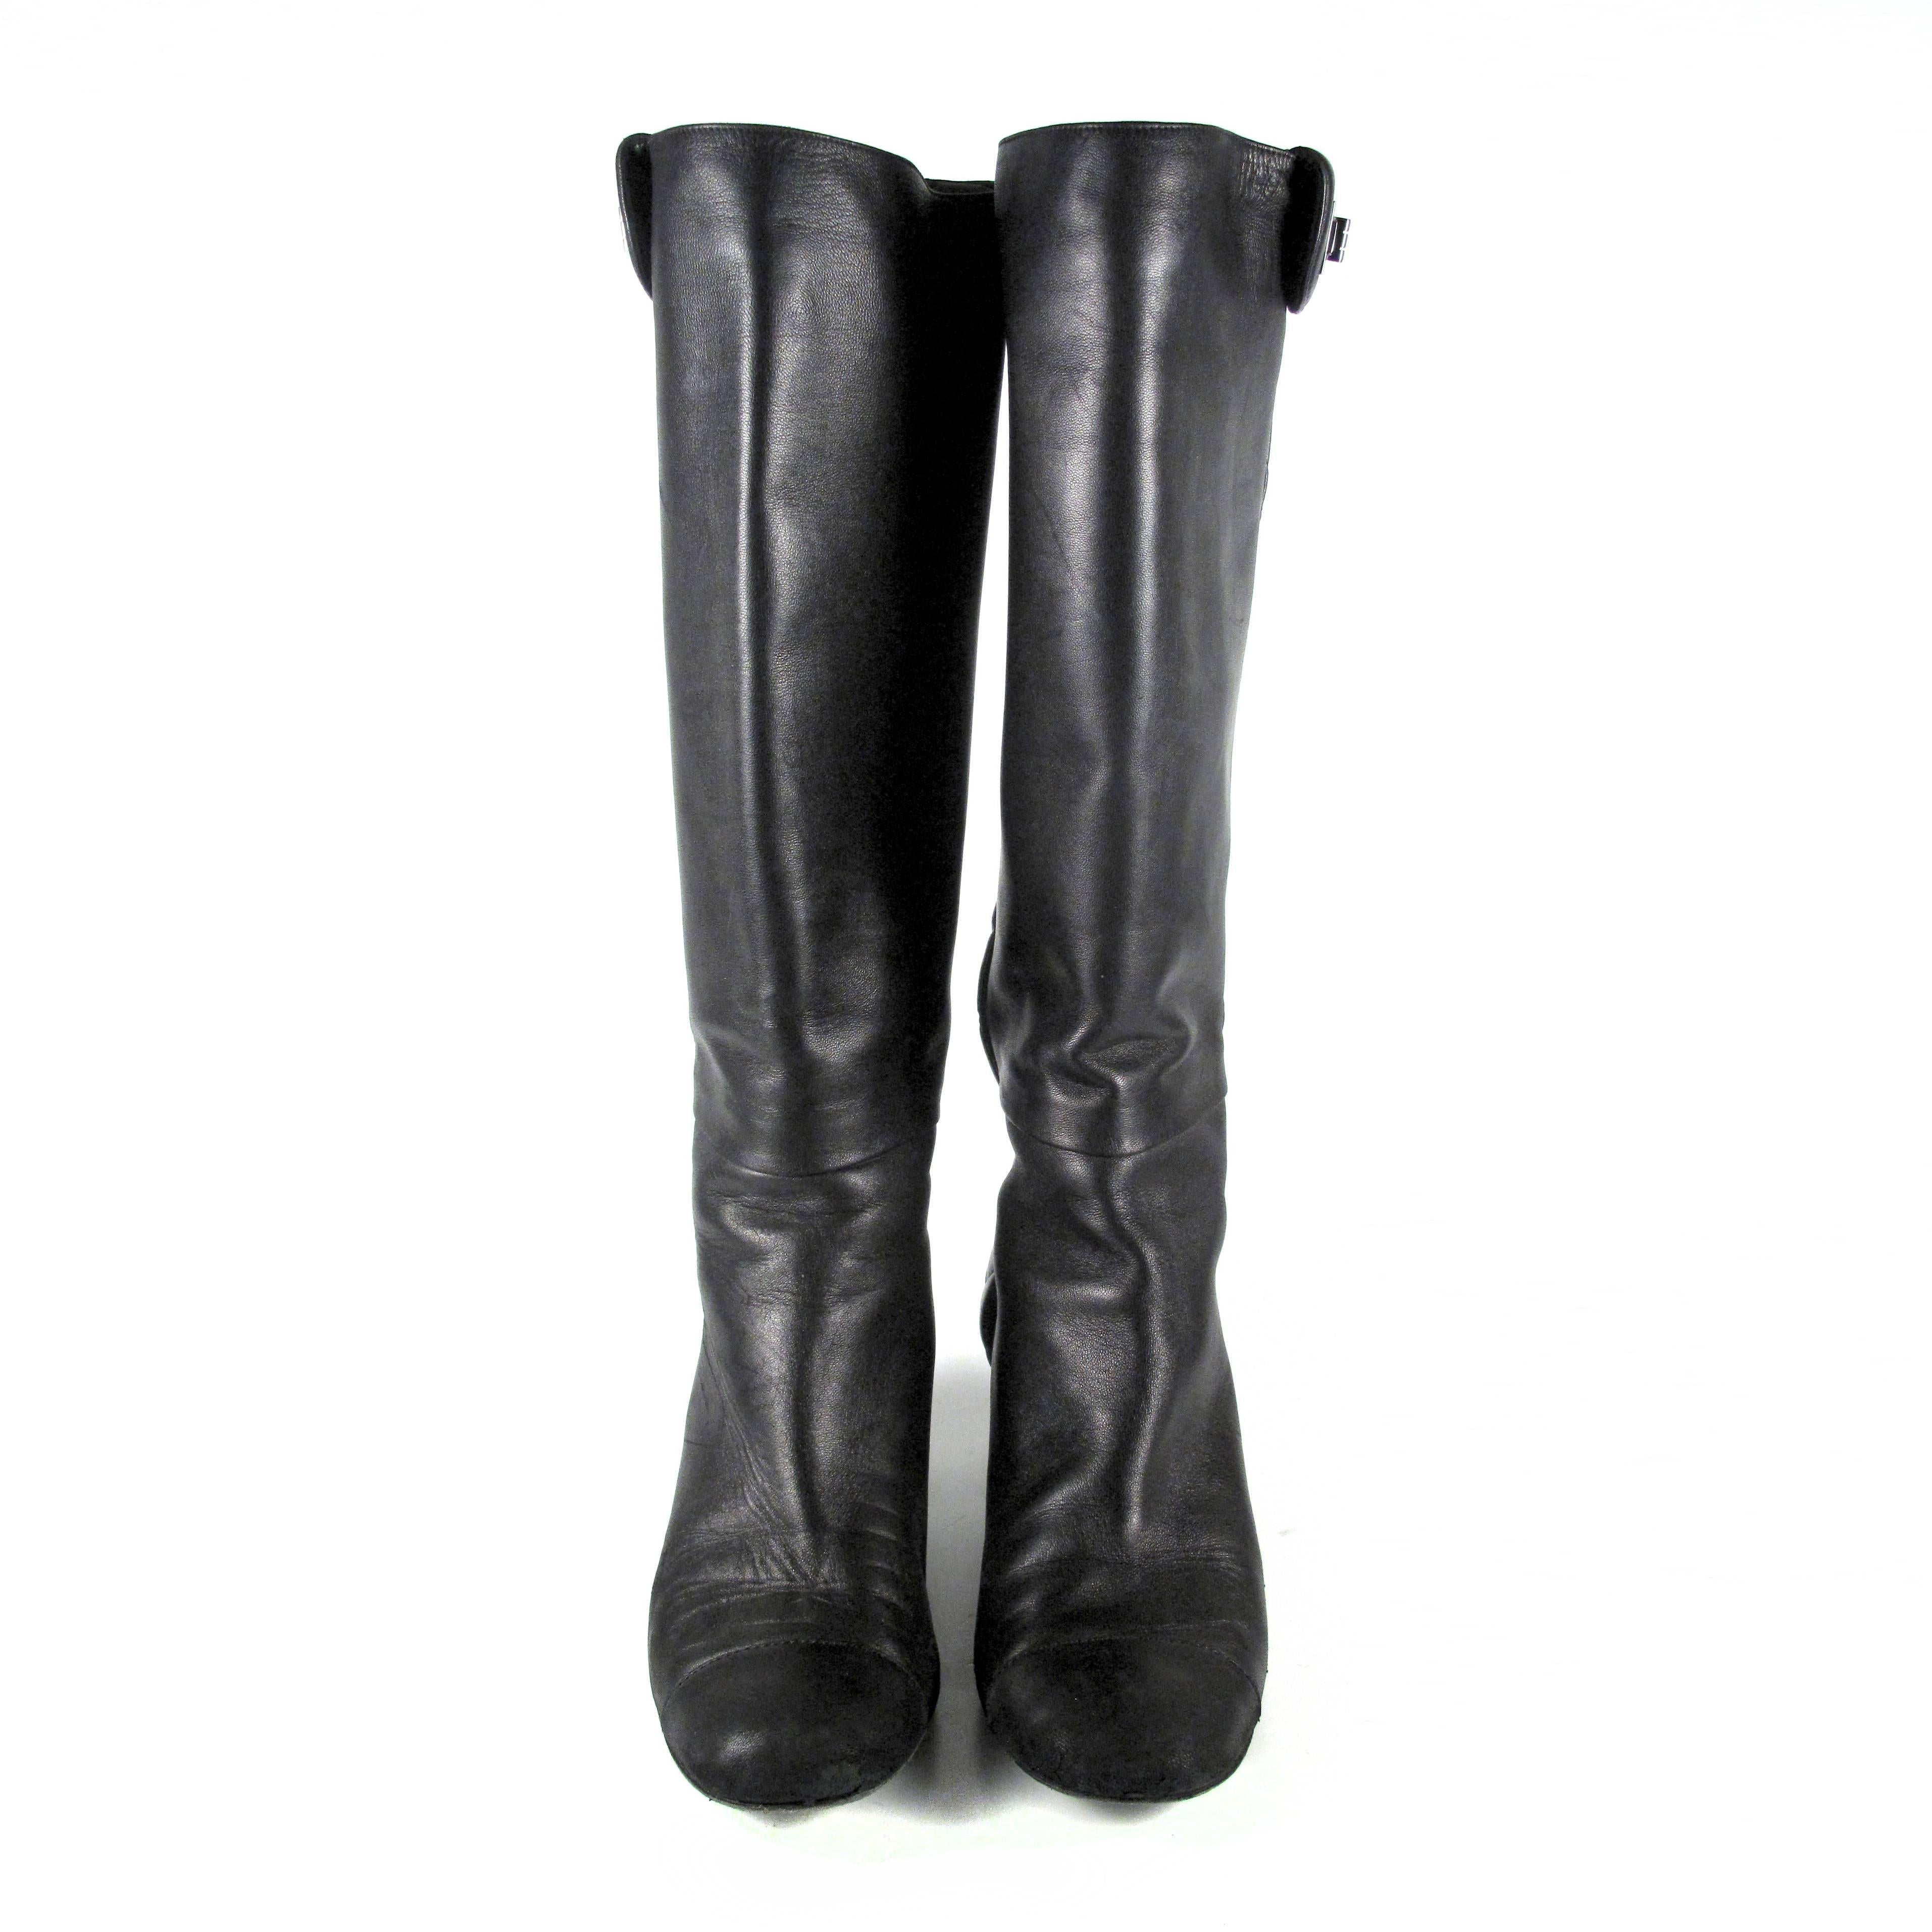 Chanel - Knee High Boots

Size: 37 - Fits a US 6.5 / 36.5

Color: Black

Material: Leather

------------------------------------------------------------

Details:

- round toe

- quilted leather panel along back

- turnlock logo